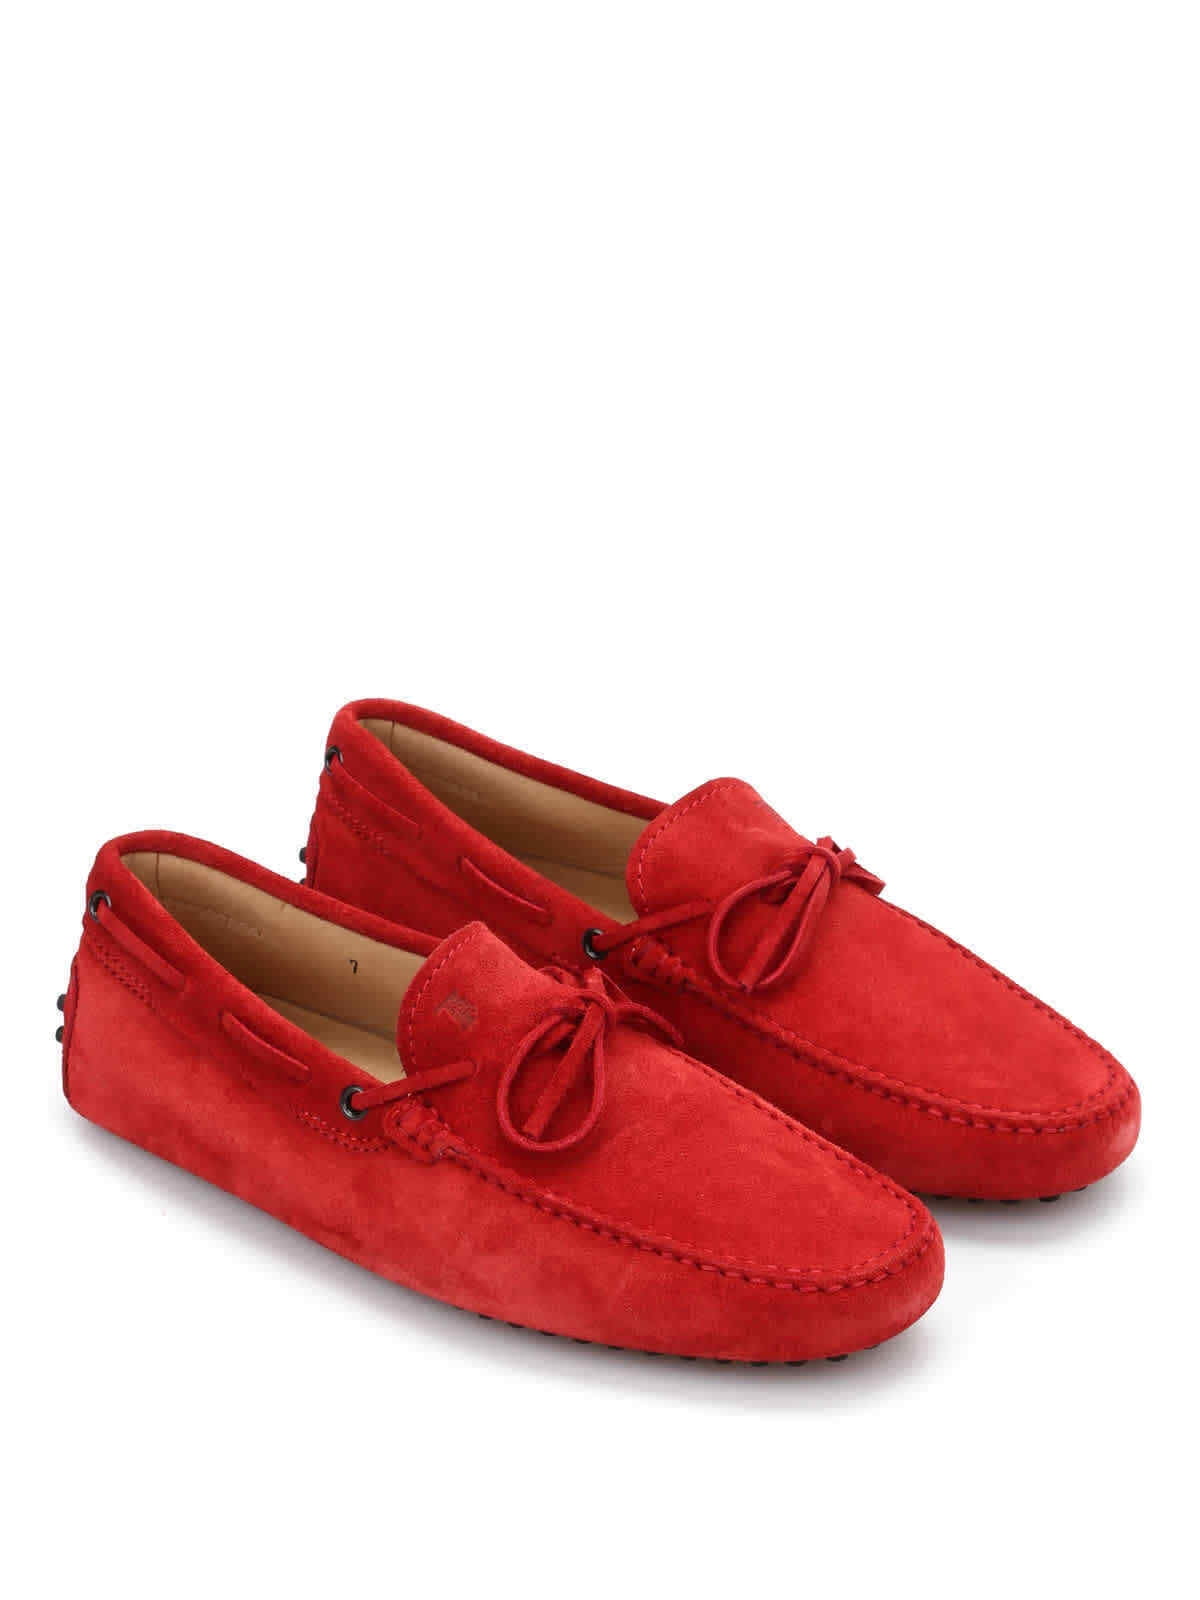 TOD'S Men's Leather Moccasins RED SUEDE MOCCASIN DRIVERS SHOES